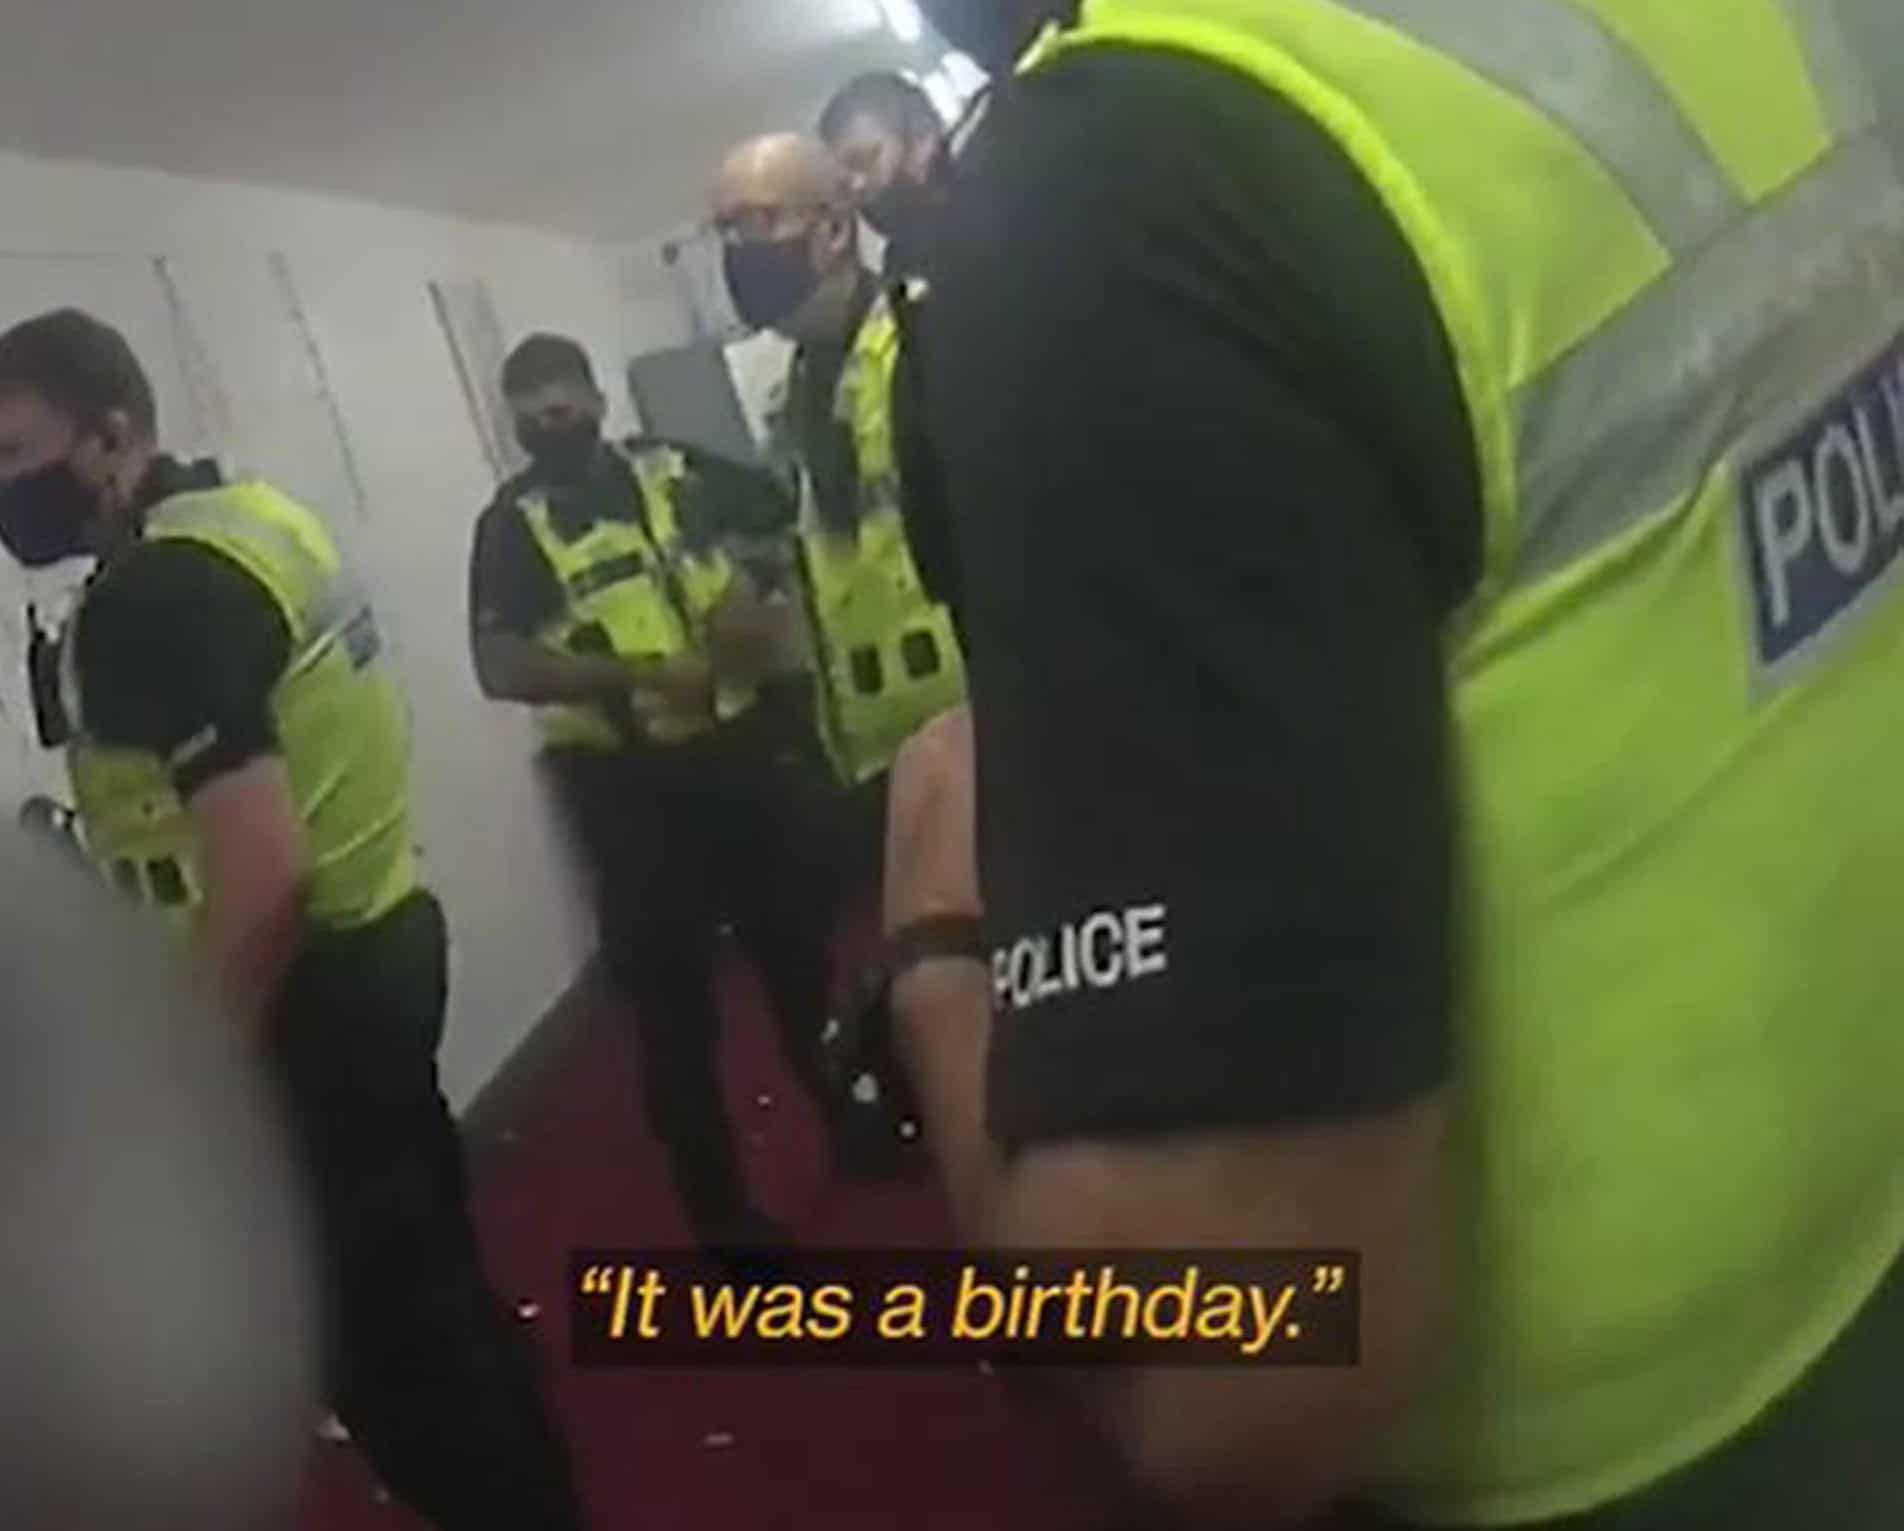 Birthday party organiser fined £10,000 for ‘blatant breach’ of lockdown rules